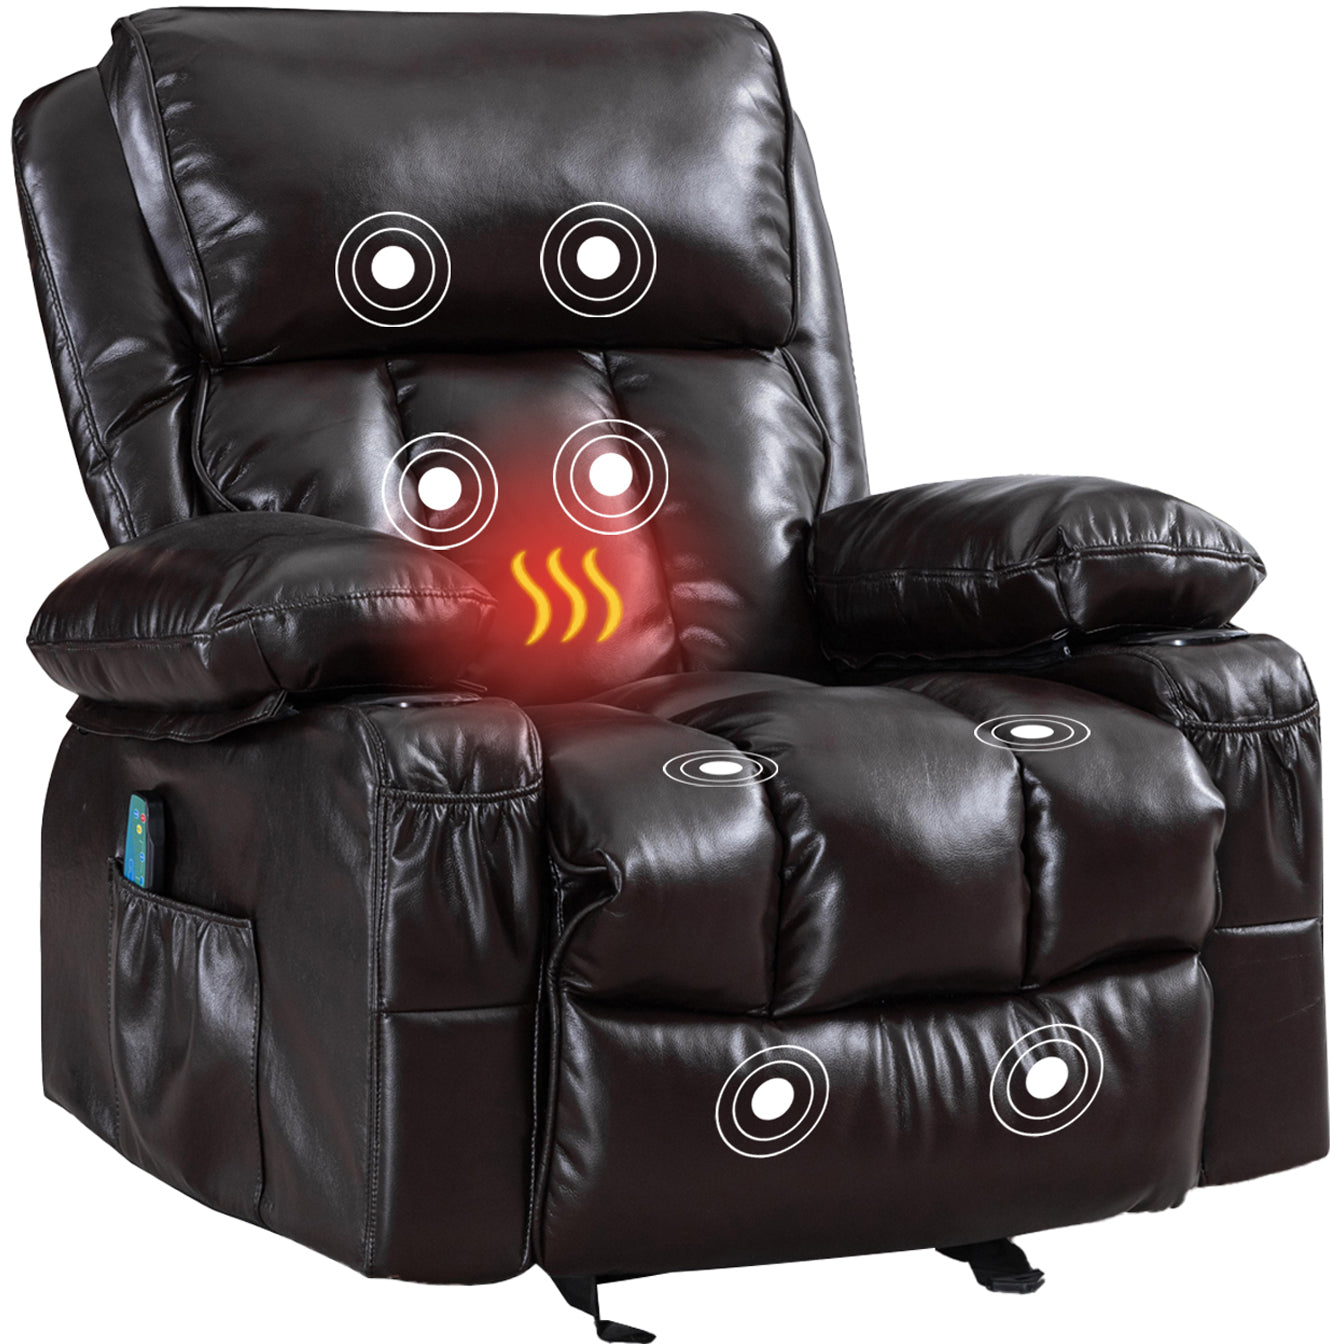 SYNGAR Manual Recliner Chair with Heat and Vibration Massage, Faux Leather Elderly Single Reclining Rocker Sofa with USB Charge Port, Cup Holders and Side Pocket for Bedroom Home Theater, Black